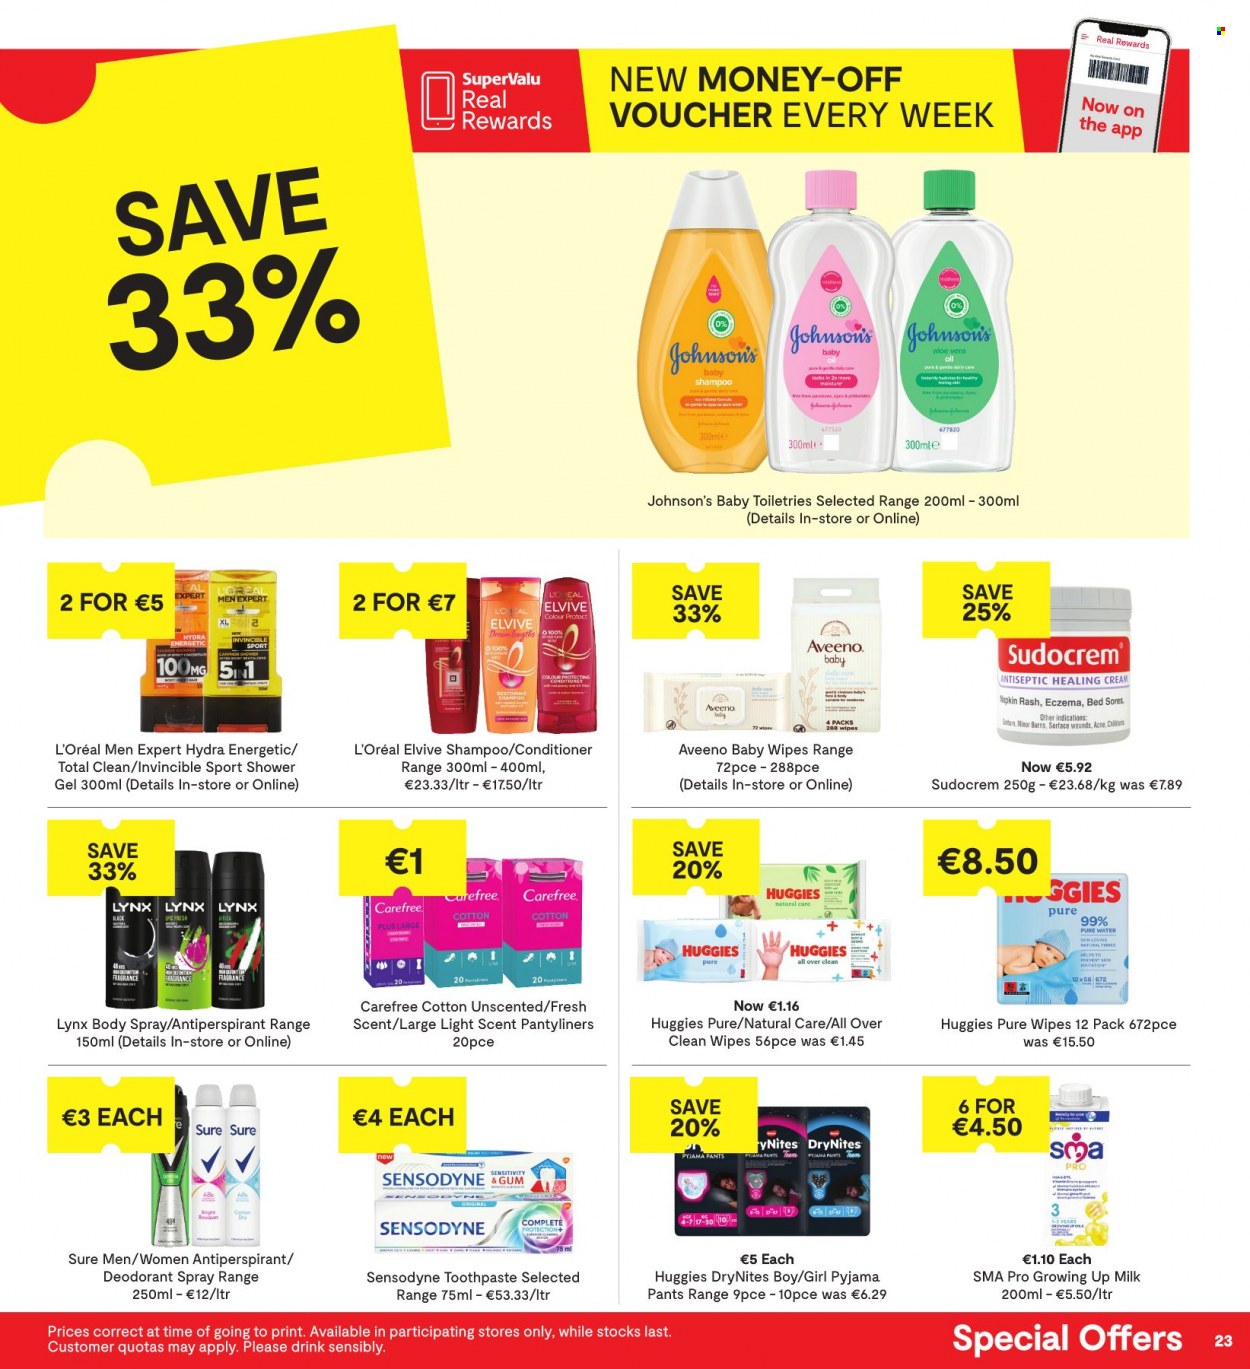 thumbnail - SuperValu offer  - 08.12.2022 - 21.12.2022 - Sales products - milk, purified water, wipes, Huggies, pants, baby wipes, napkins, DryNites, Johnson's, Aveeno, shampoo, shower gel, toothpaste, Sensodyne, Carefree, pantyliners, L’Oréal, L’Oréal Men, conditioner, body spray, anti-perspirant, fragrance, Sure, deodorant, Sudocrem. Page 23.